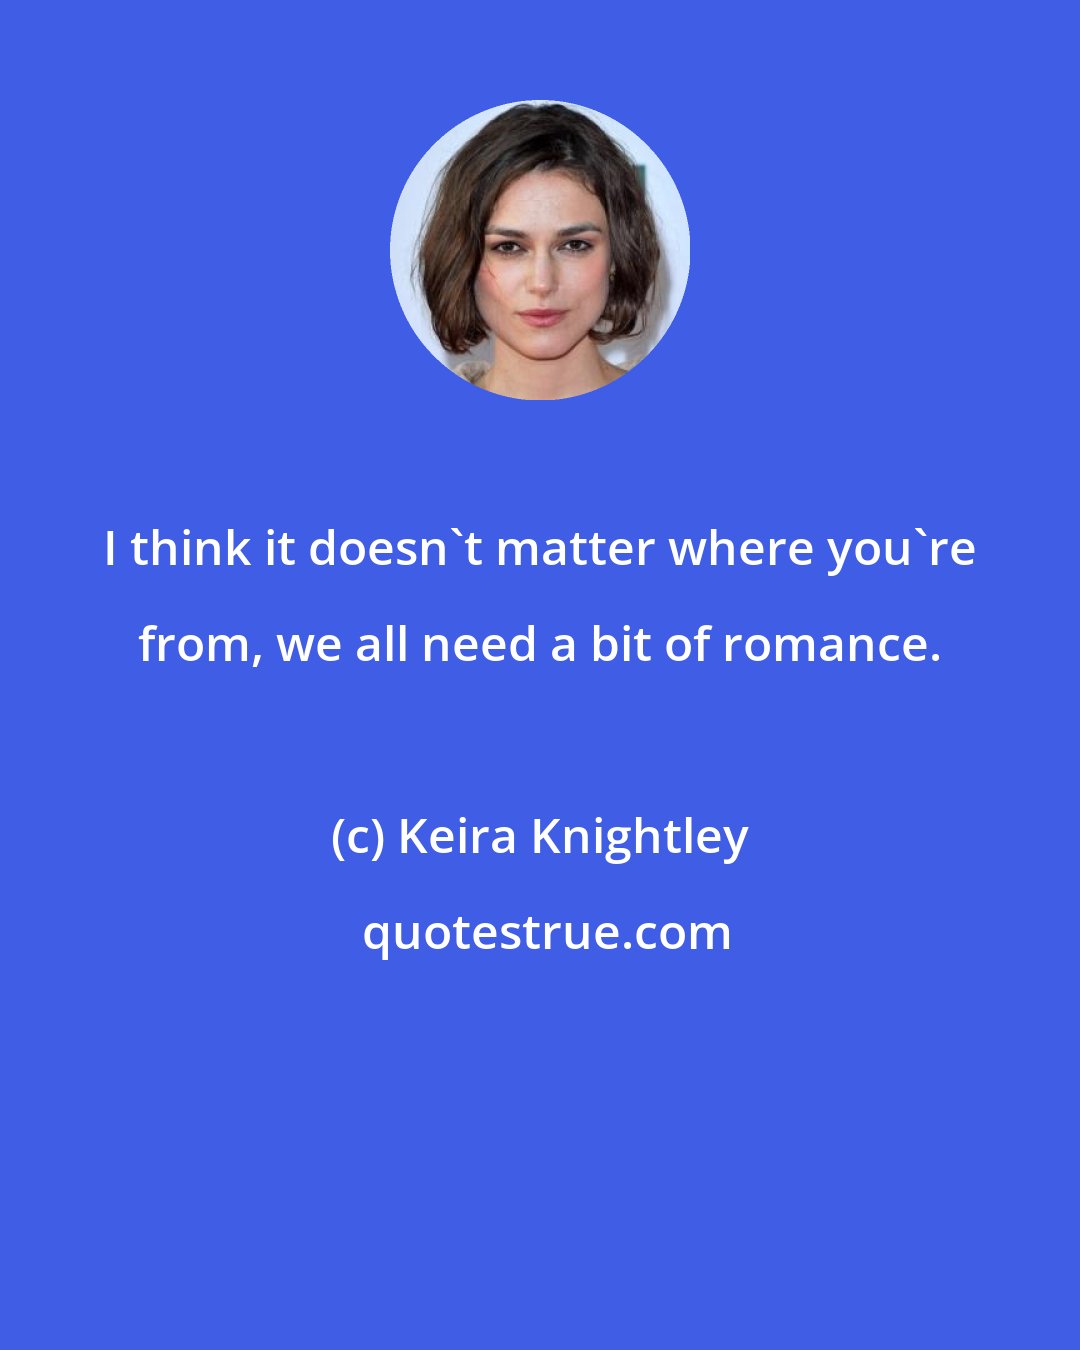 Keira Knightley: I think it doesn't matter where you're from, we all need a bit of romance.